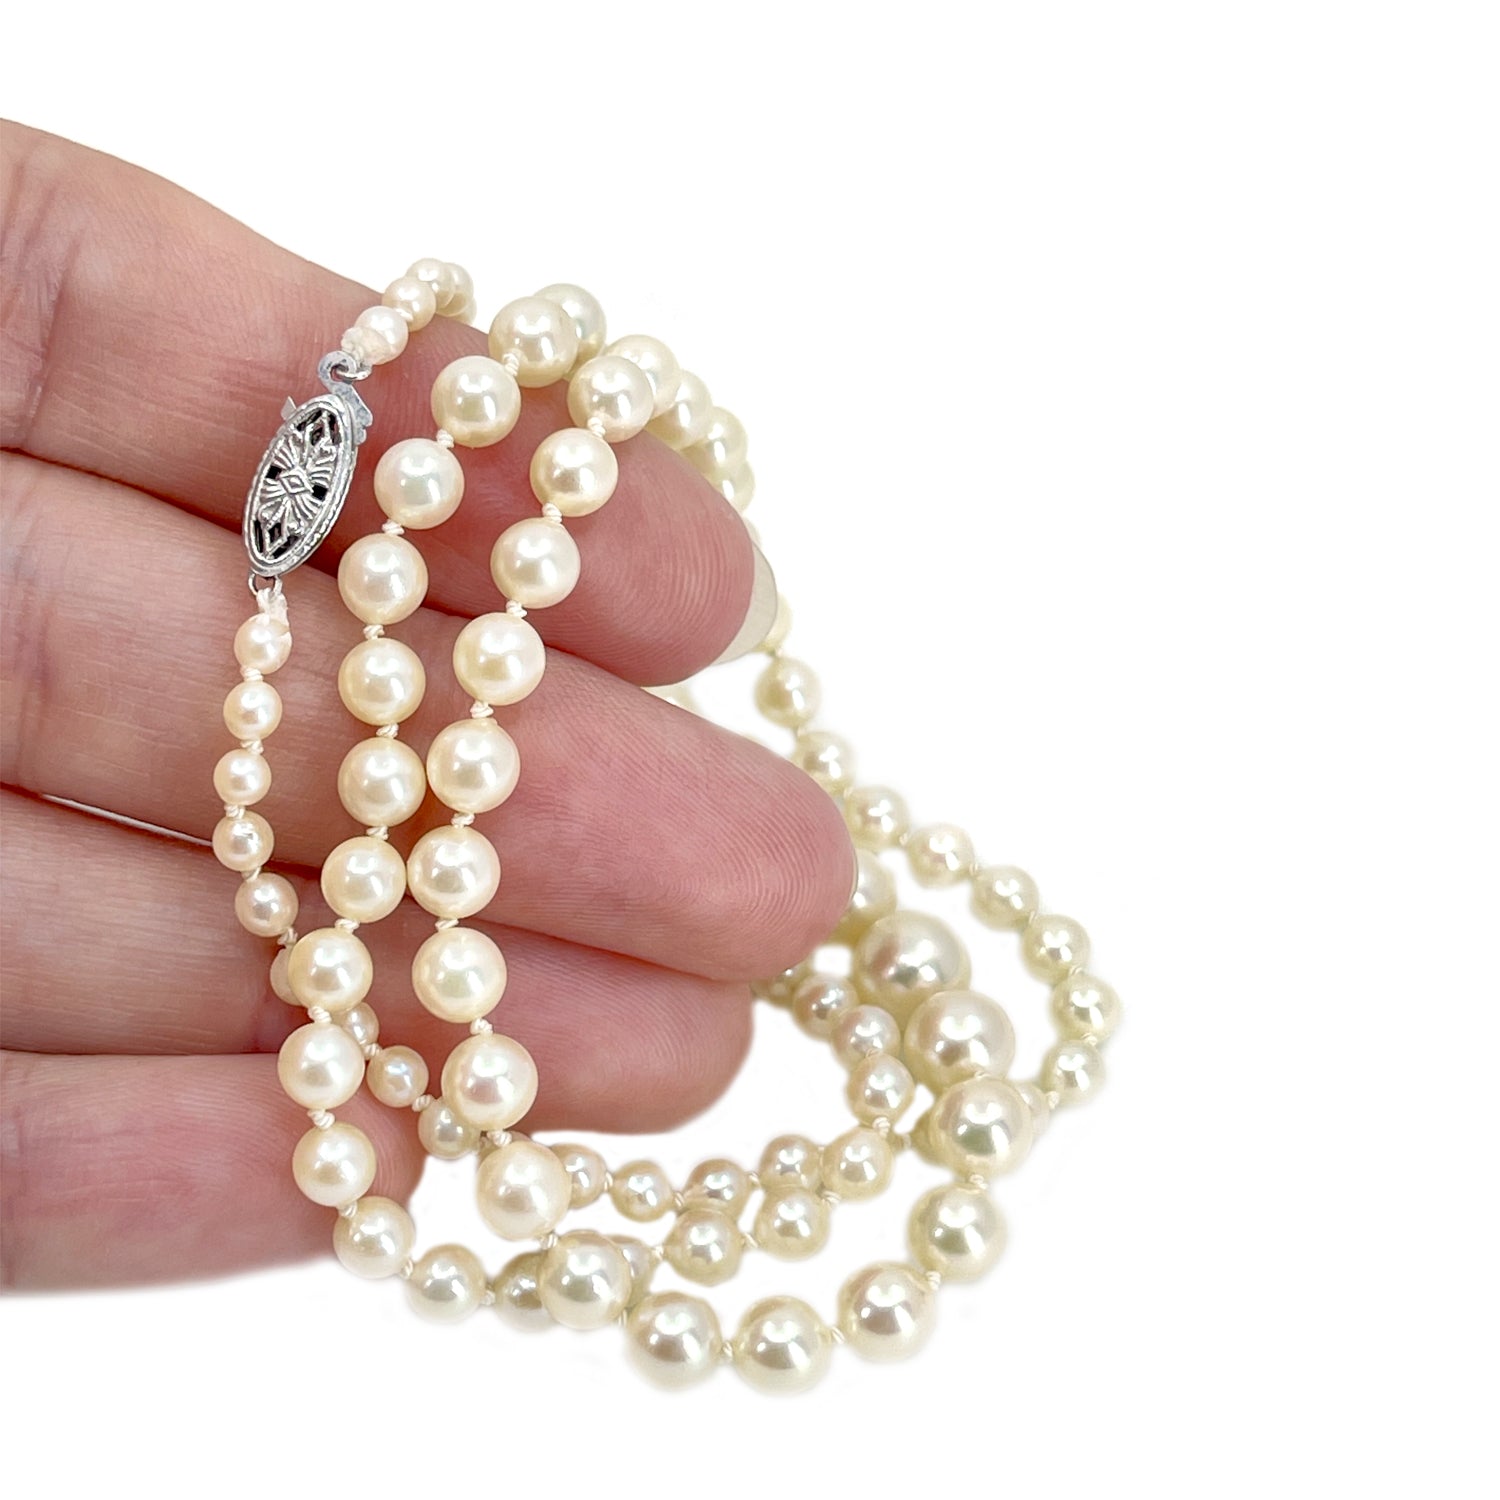 Filigree Retro Japanese Saltwater Cultured Akoya Pearl Vintage Necklace - 10K White Gold 20.50 Inch